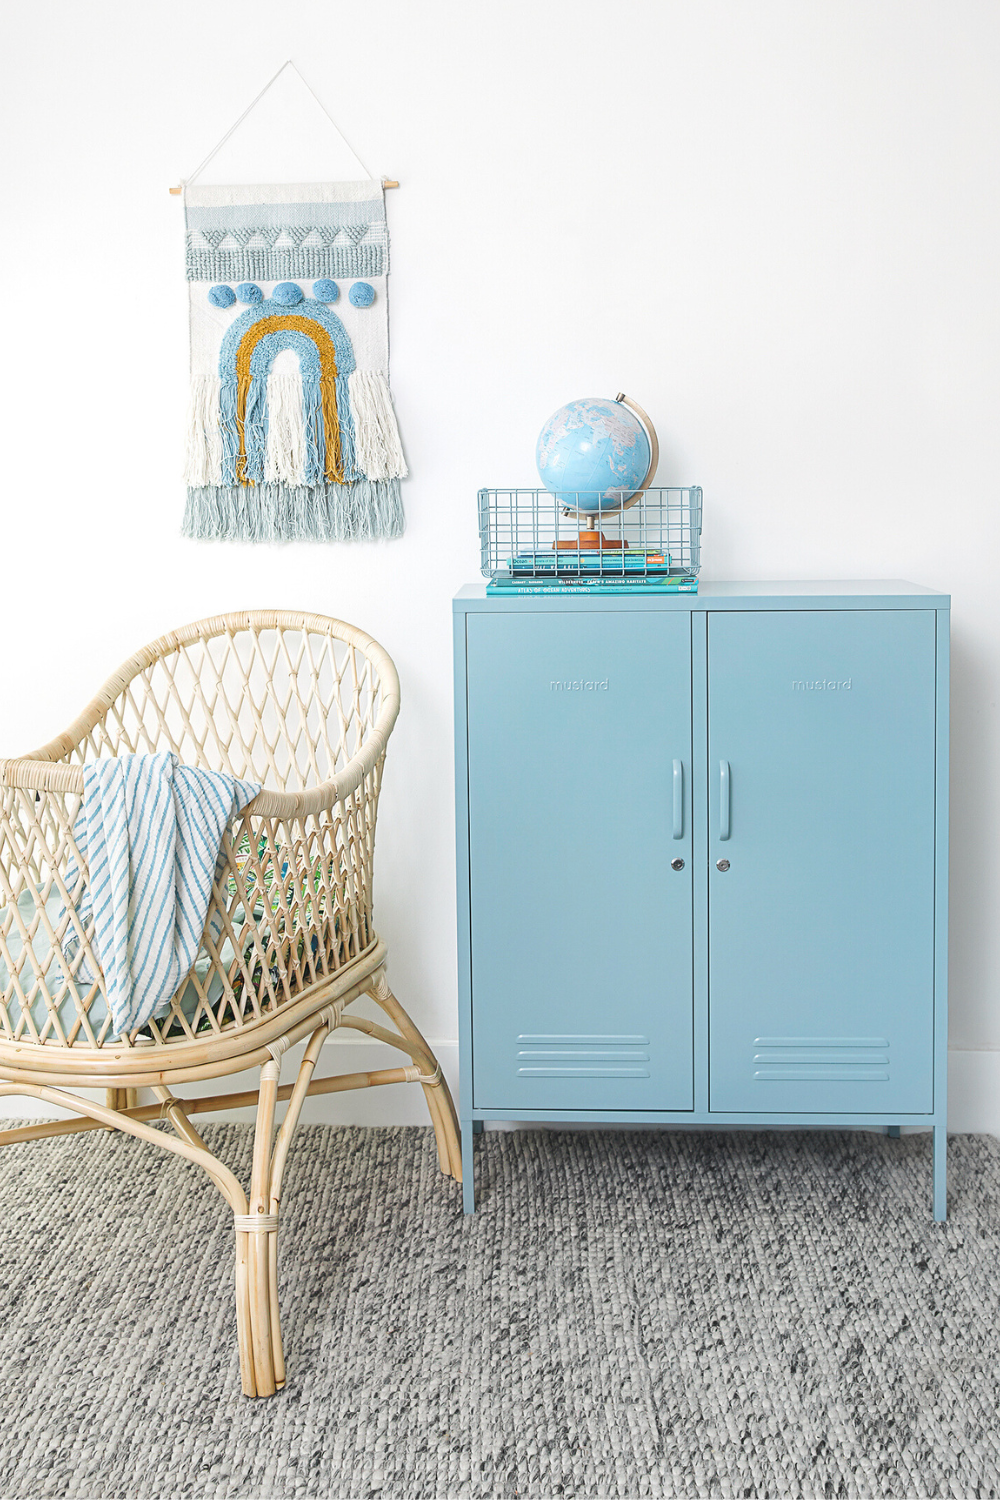 An Ocean Midi sits next to a rattan bassinet in a blue-themed nursery. There is a tufted wall hanging and a collection of Ocean blue accessories.